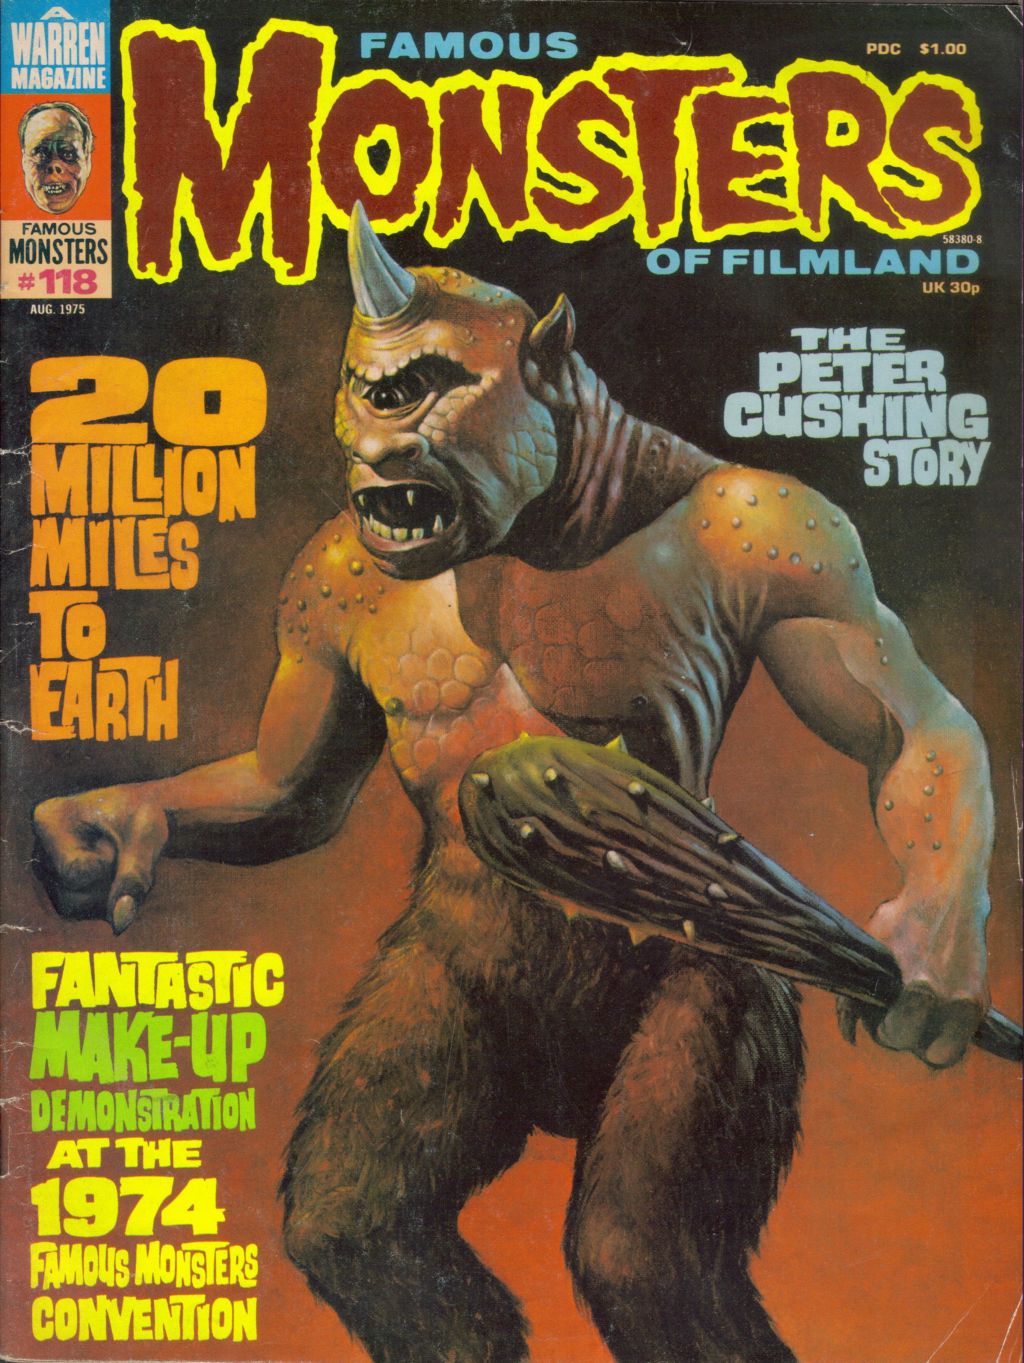 FAMOUS MONSTERS OF FILMLAND 118.PDF-000